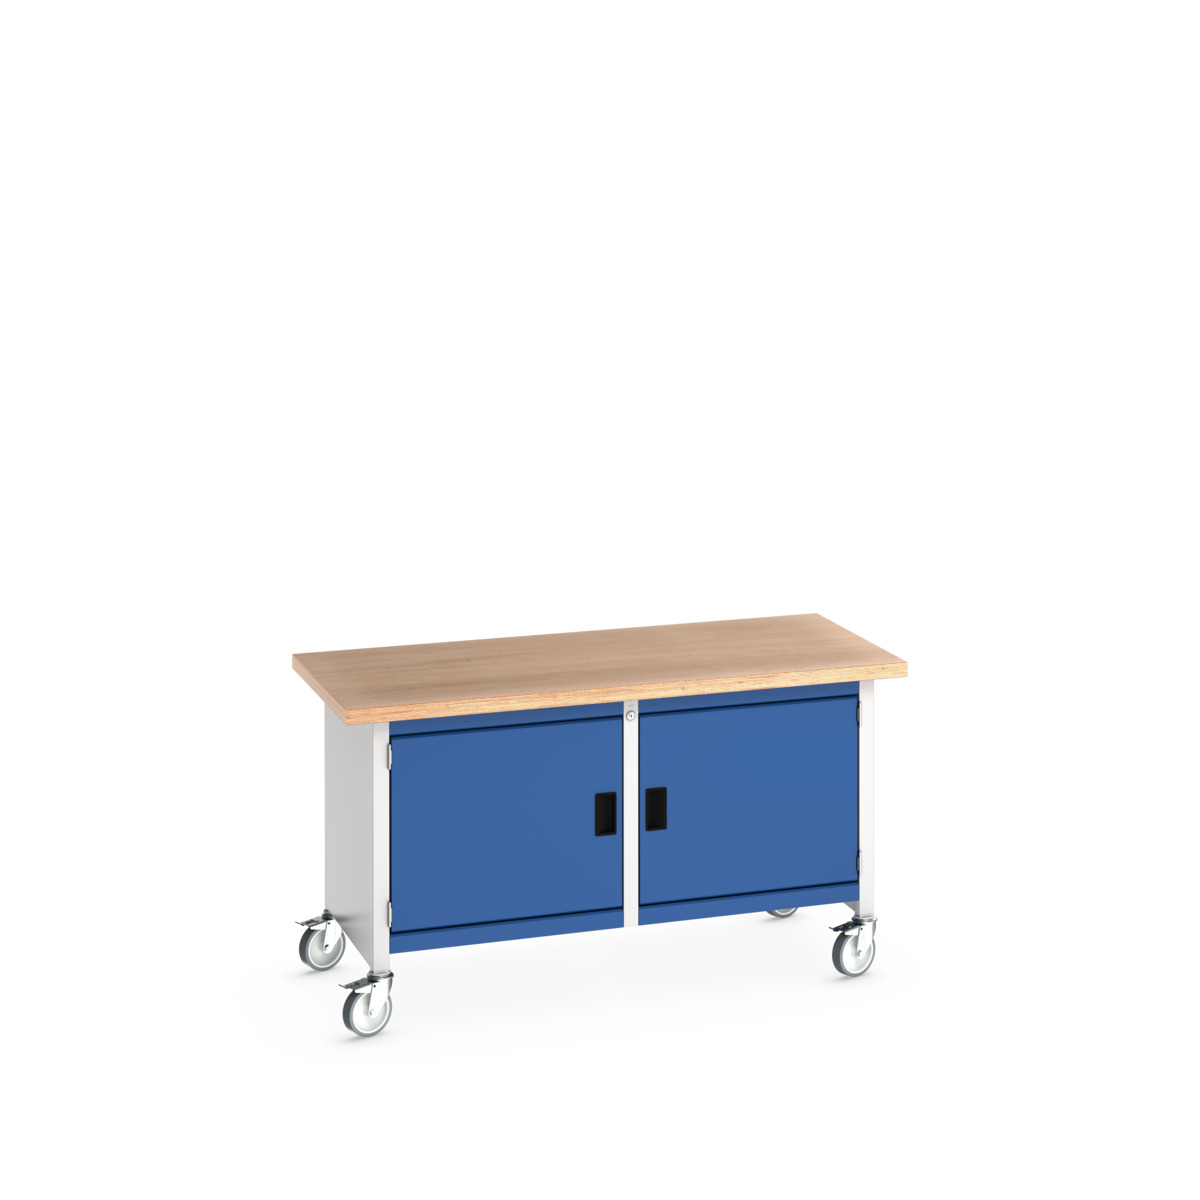 41002097.11V - cubio mobile storage bench (mpx)